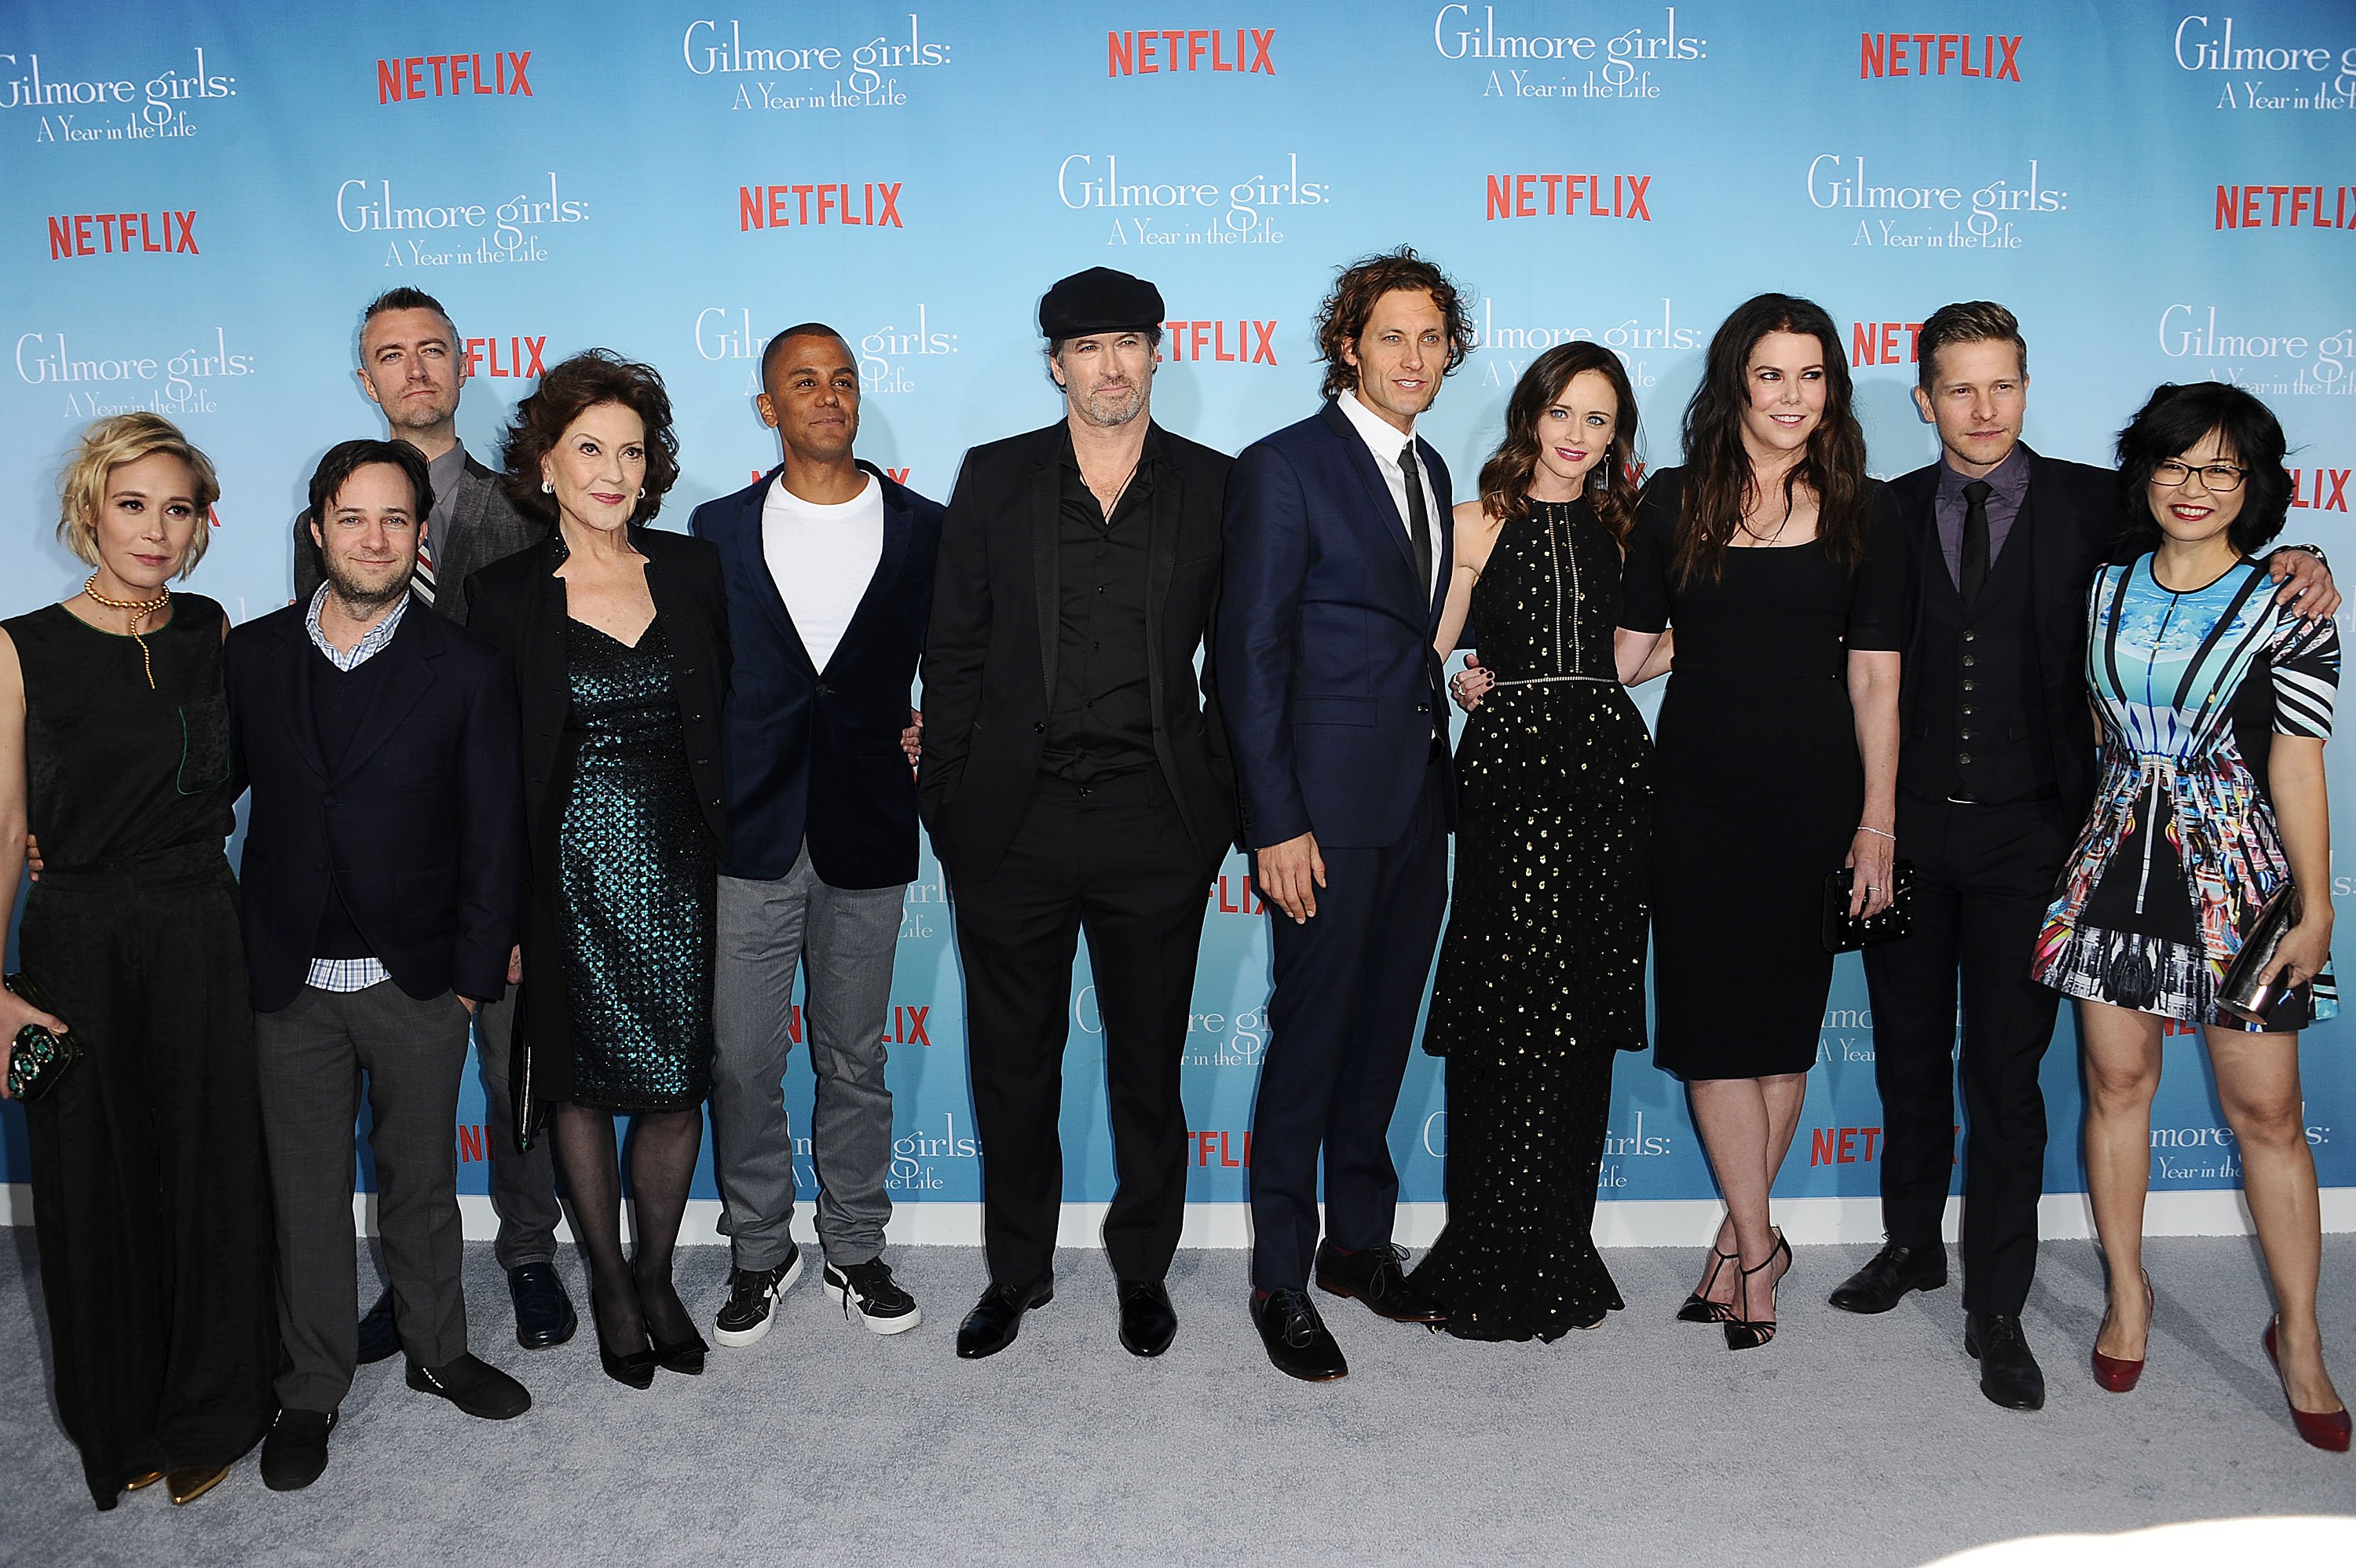 The cast of 'Gilmore Girls: A Year in the Life'